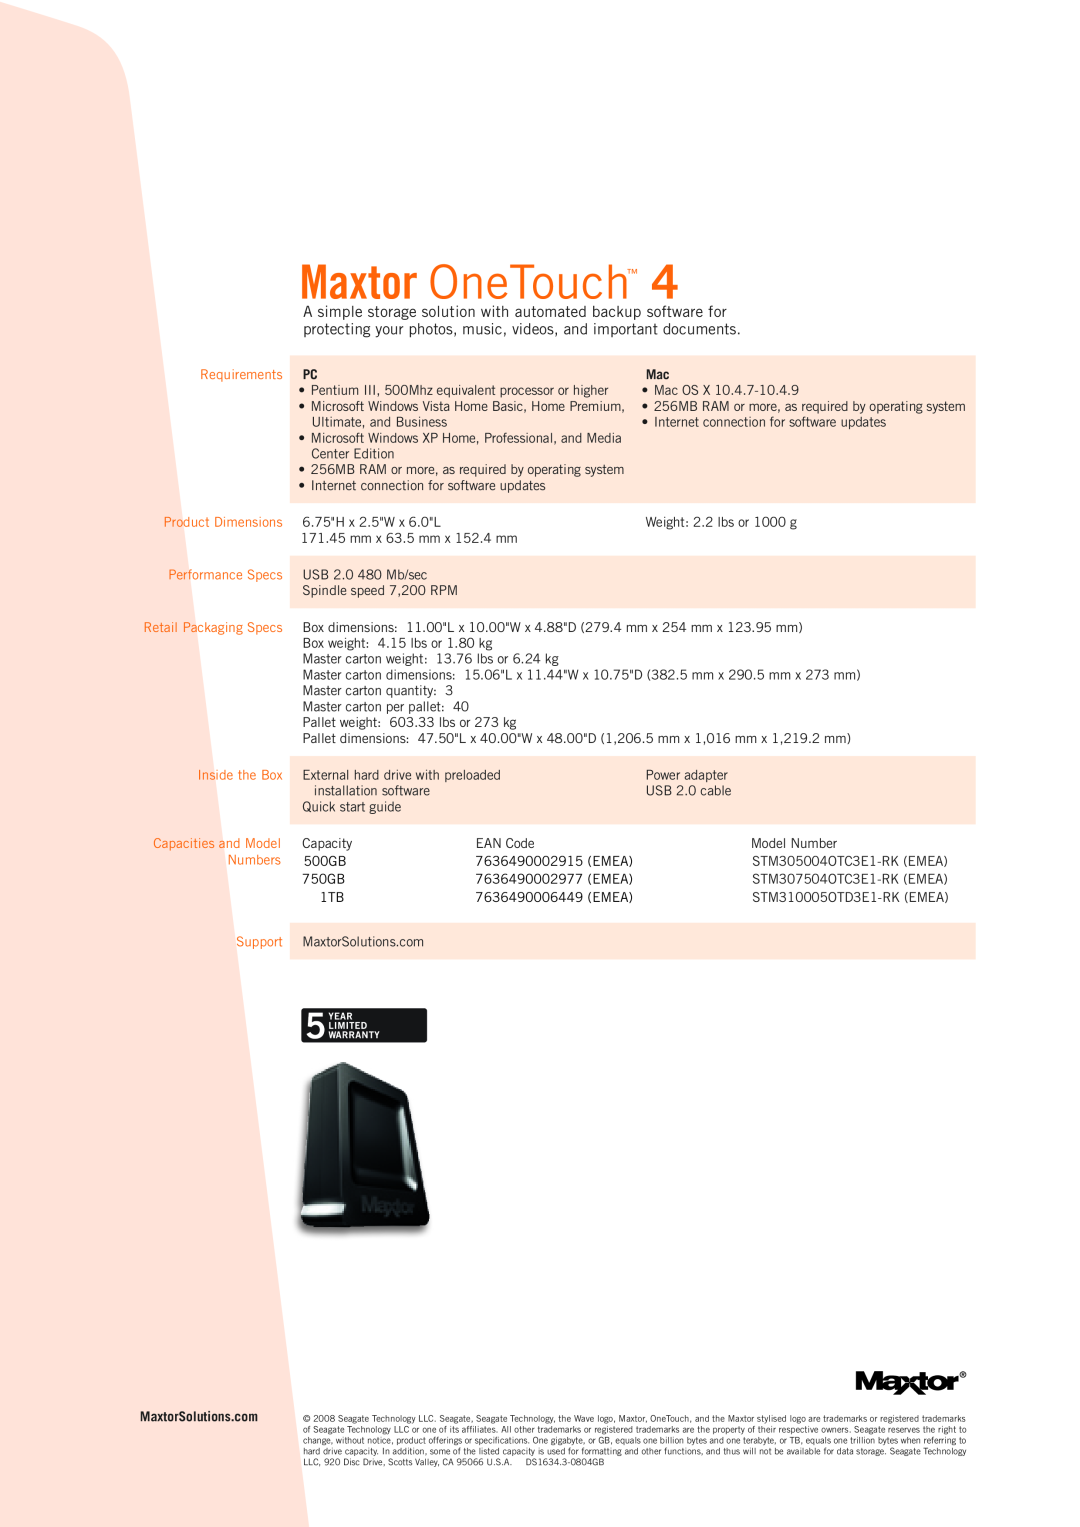 Maxtor STM307504OTC3E1-RK Maxtor OneTouch, Requirements, Product Dimensions, Performance Specs, Inside the Box, Numbers 